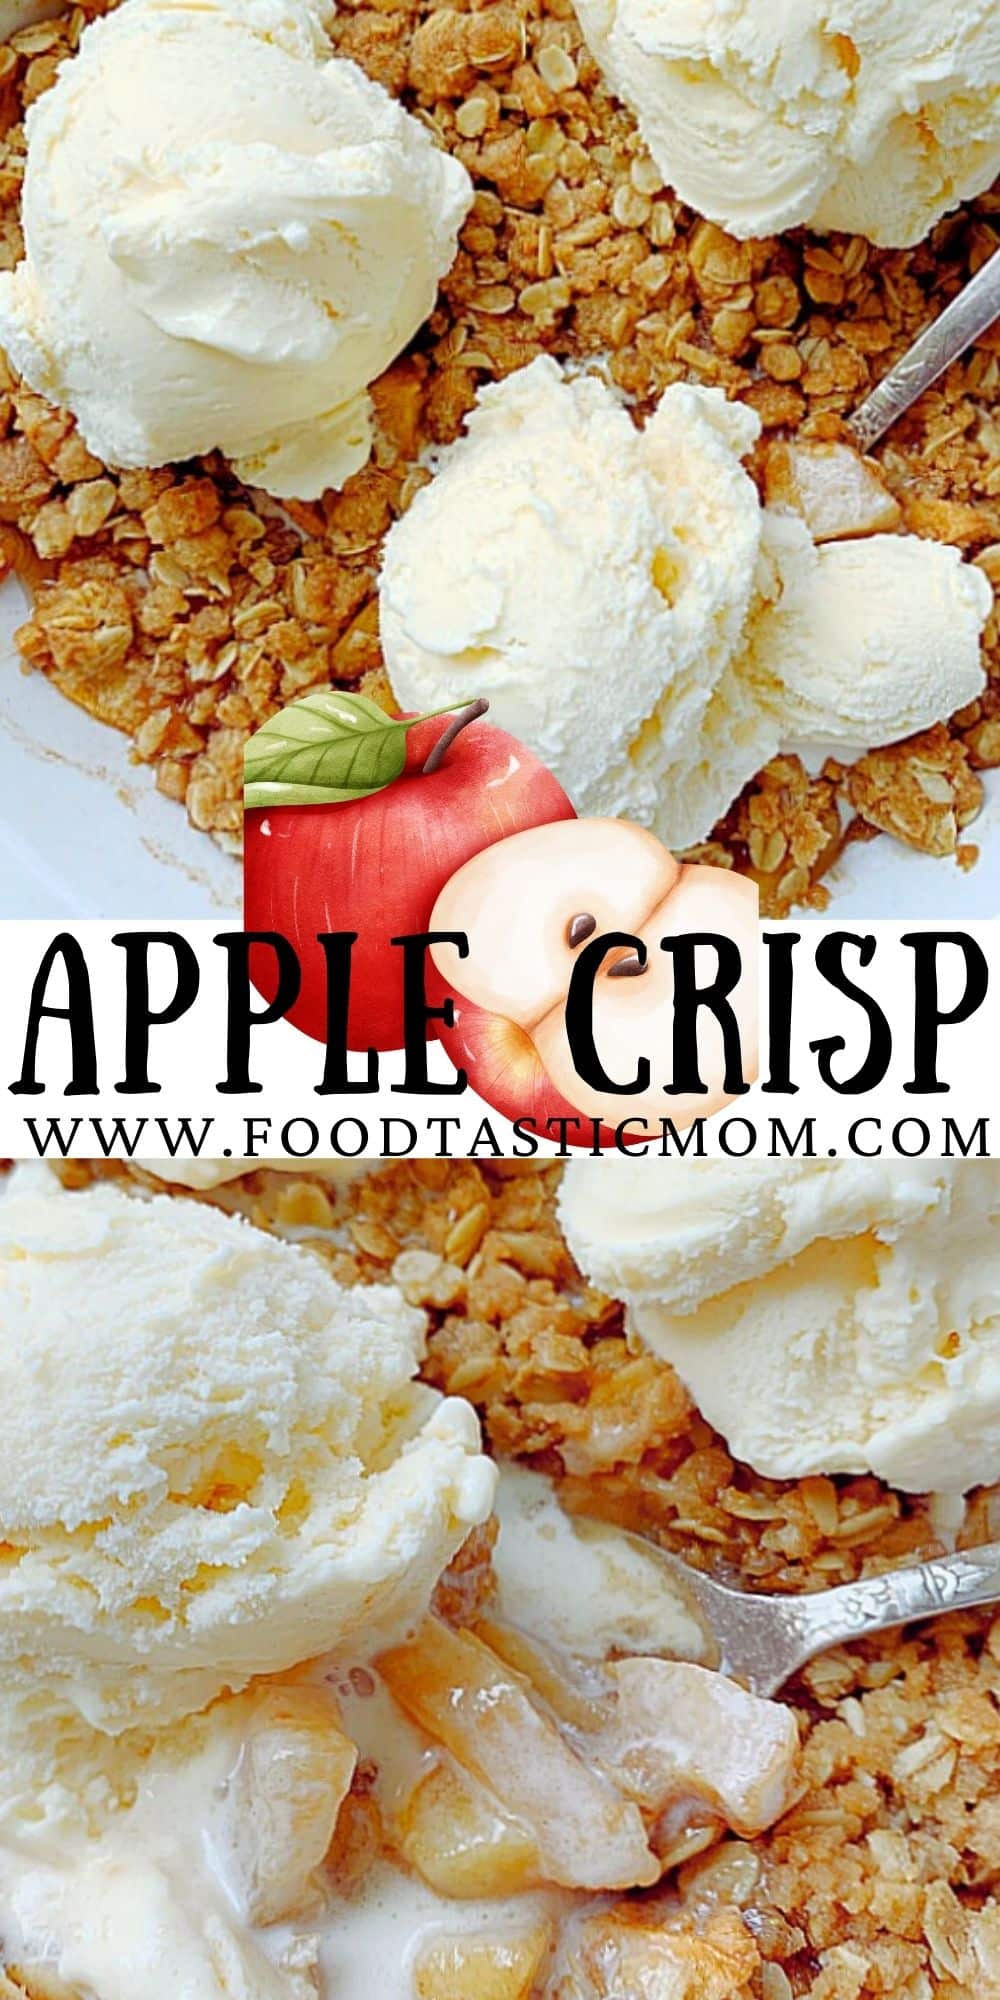 This Simply Delicious Apple Crisp is a tried and true recipe that is perfect for showing off the season's best apples.  via @foodtasticmom